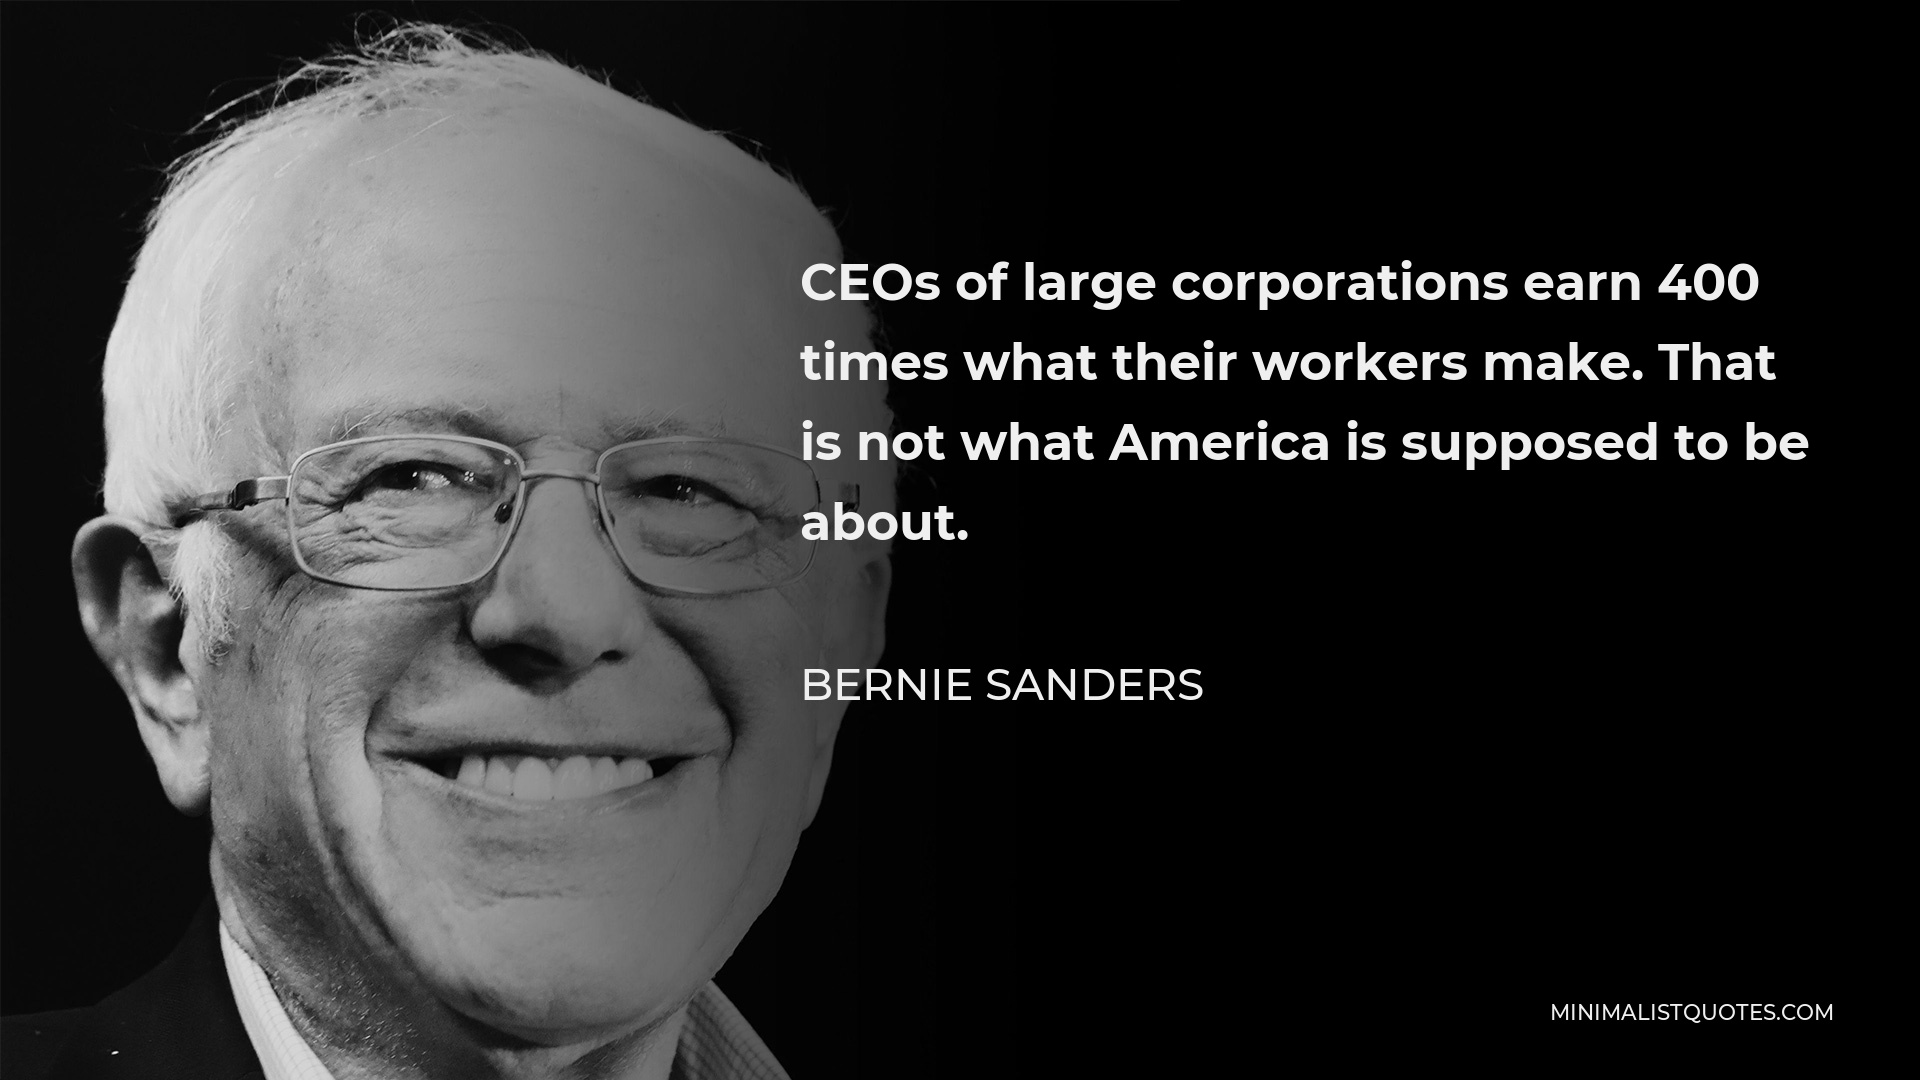 Bernie Sanders Quote - CEOs of large corporations earn 400 times what their workers make. That is not what America is supposed to be about.